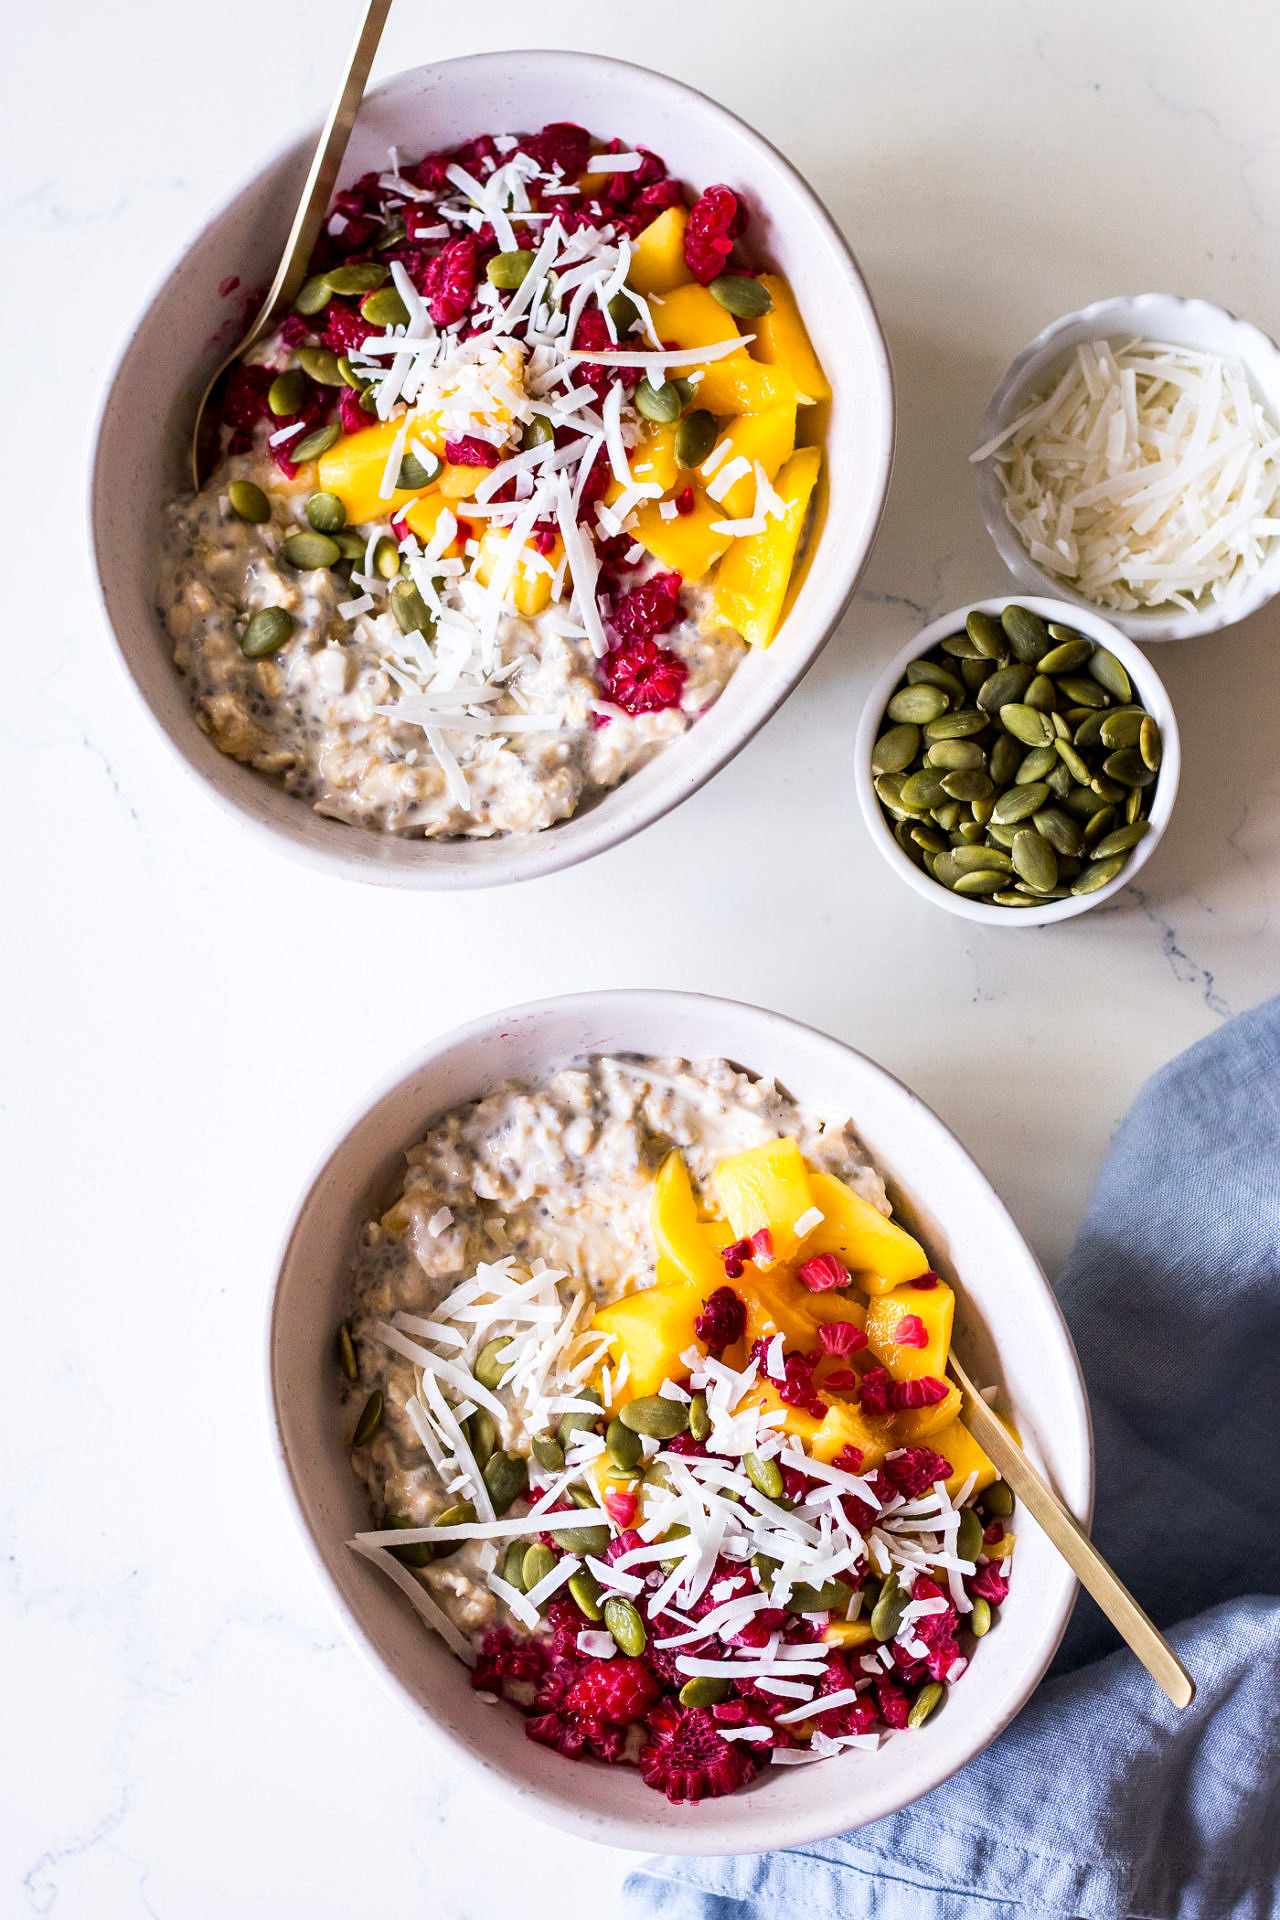 Top view of two white ceramic bowls of overnight chia oats with mango, coconut and raspberries